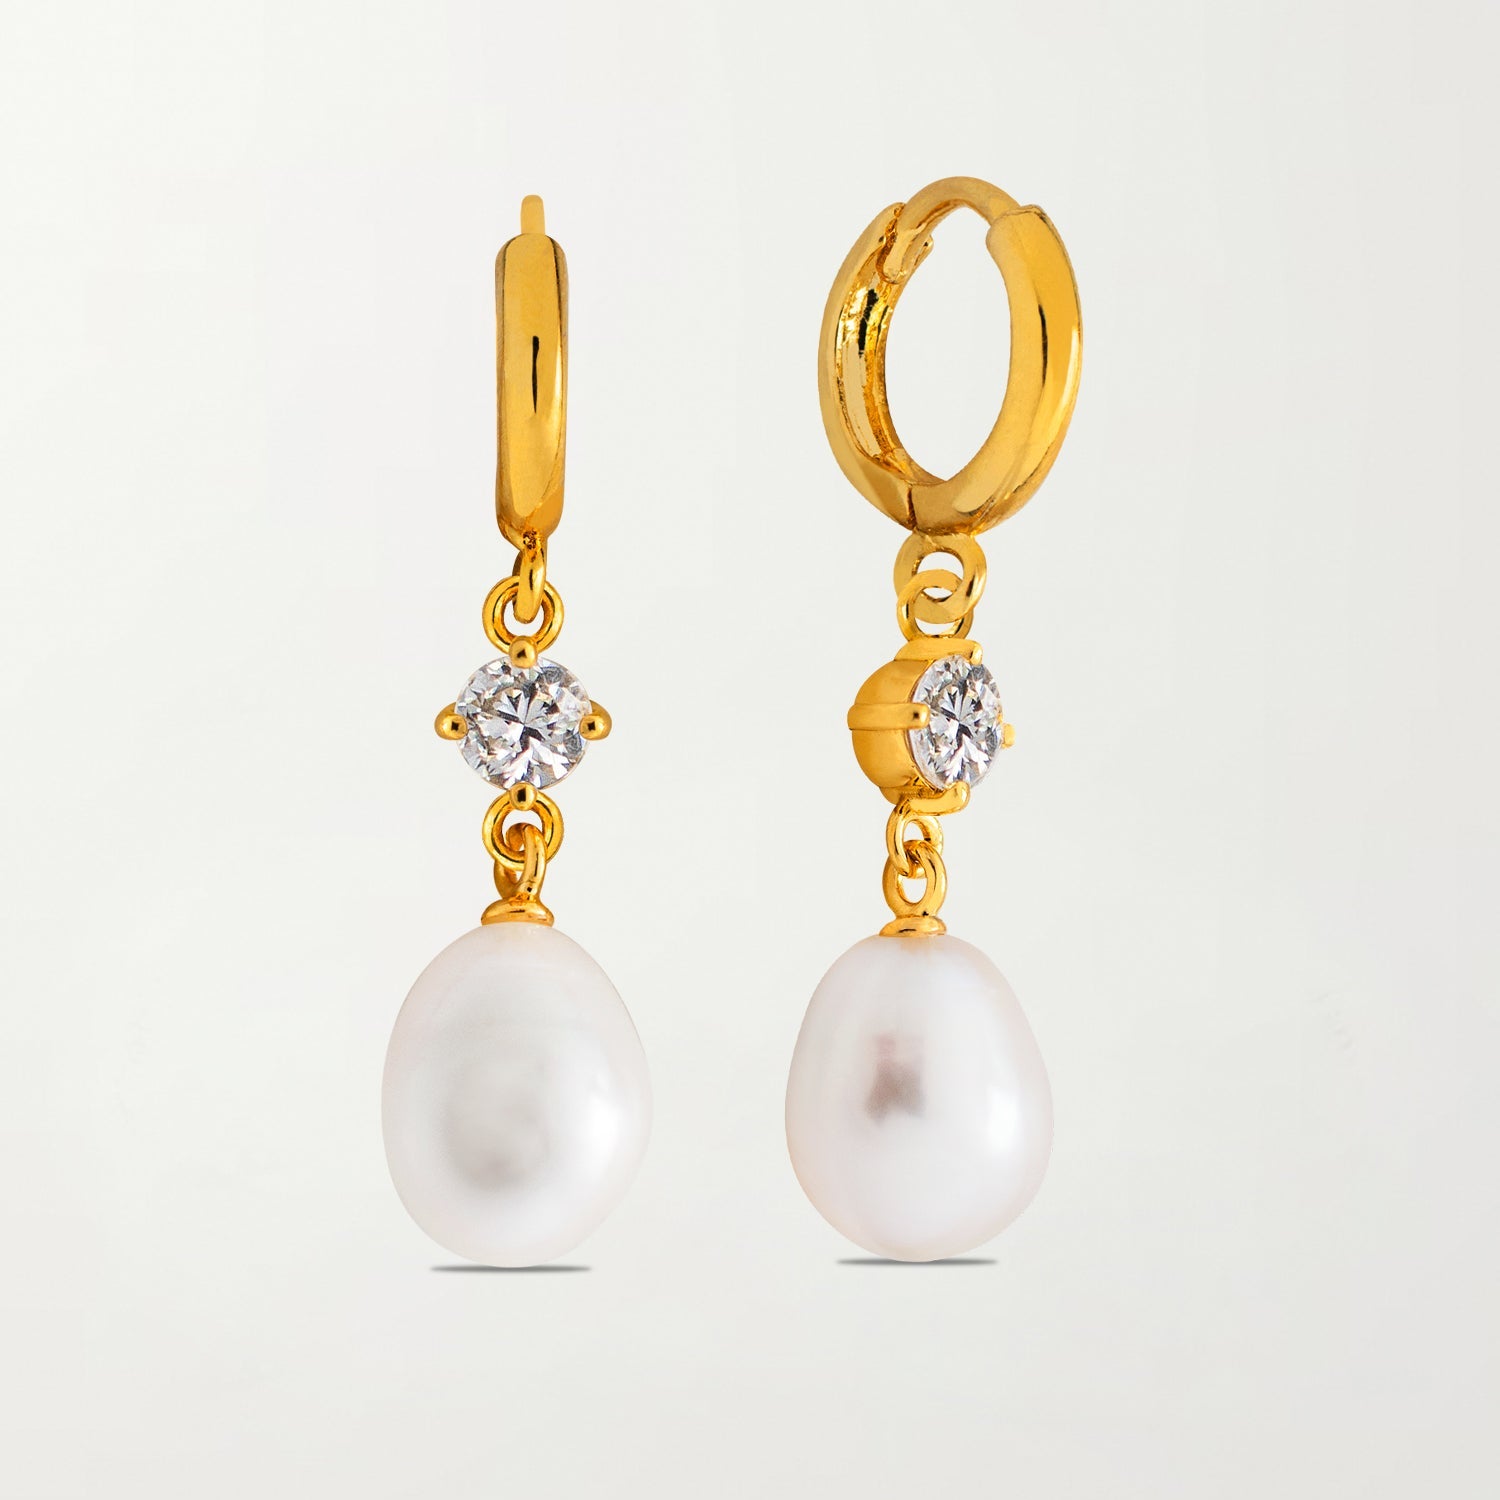 Picture of The Belmond Earrings